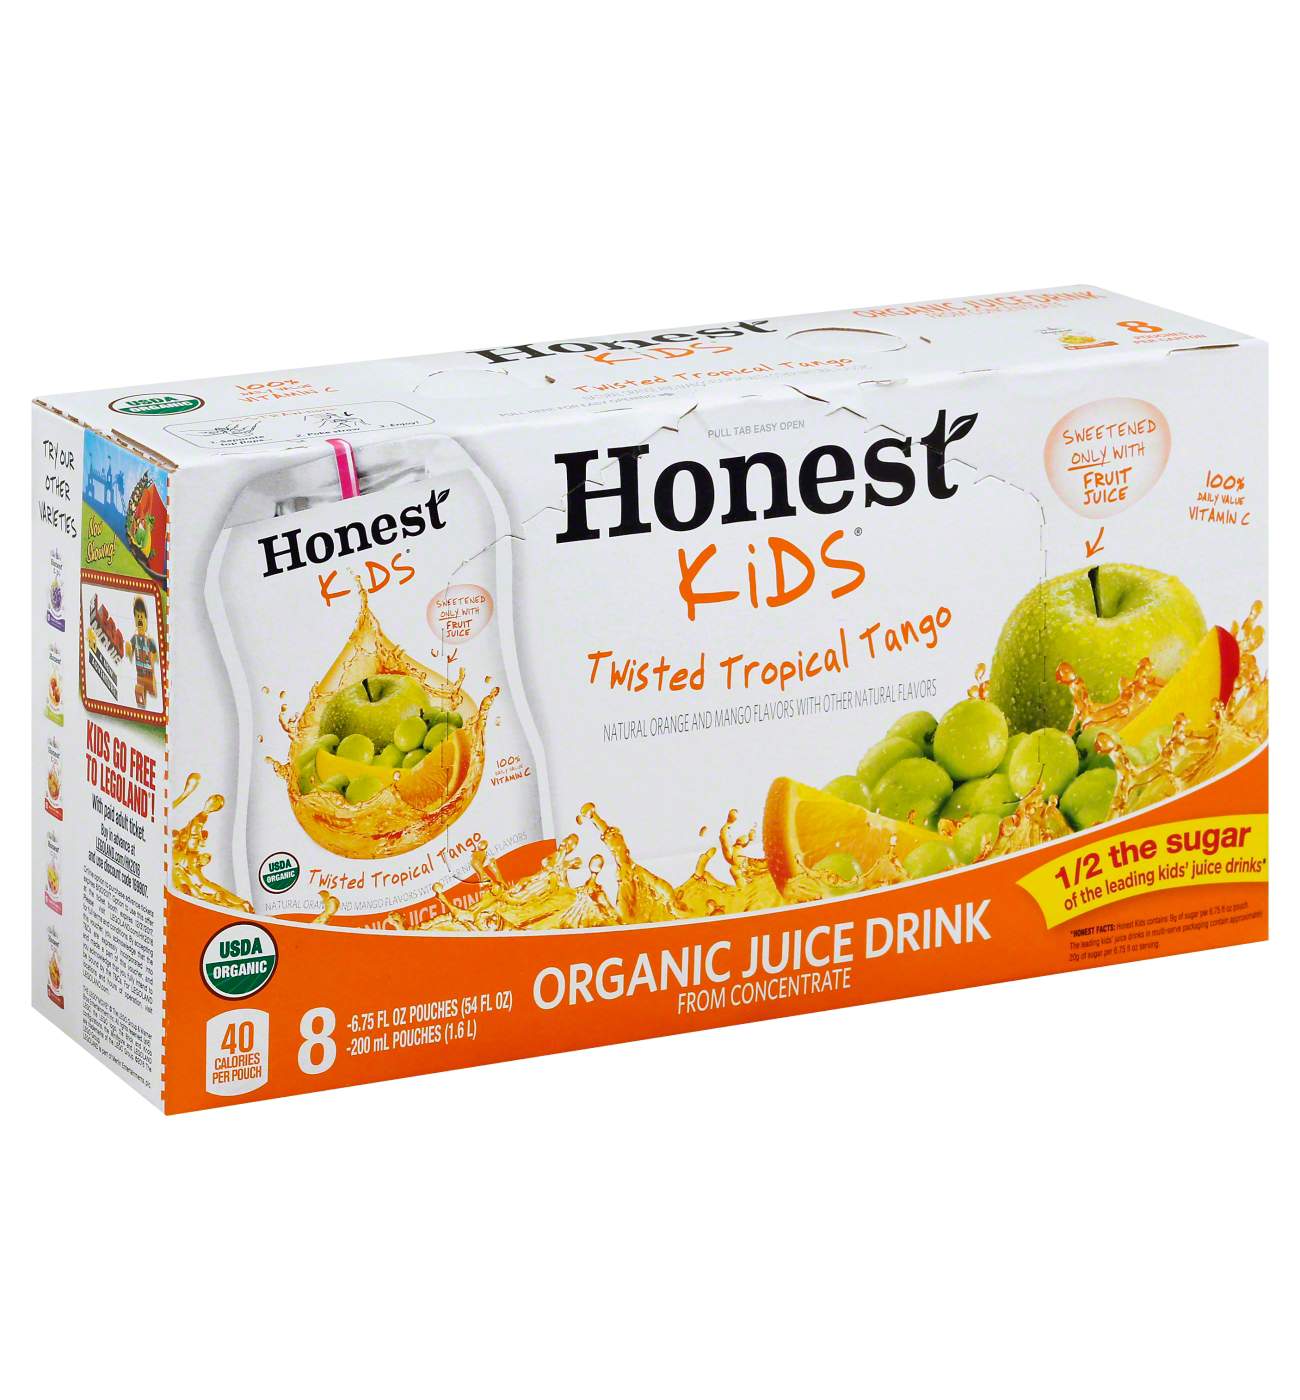 Honest Kids Twisted Tropical Tango Organic Juice Drink 6.75 oz Pouches; image 1 of 2